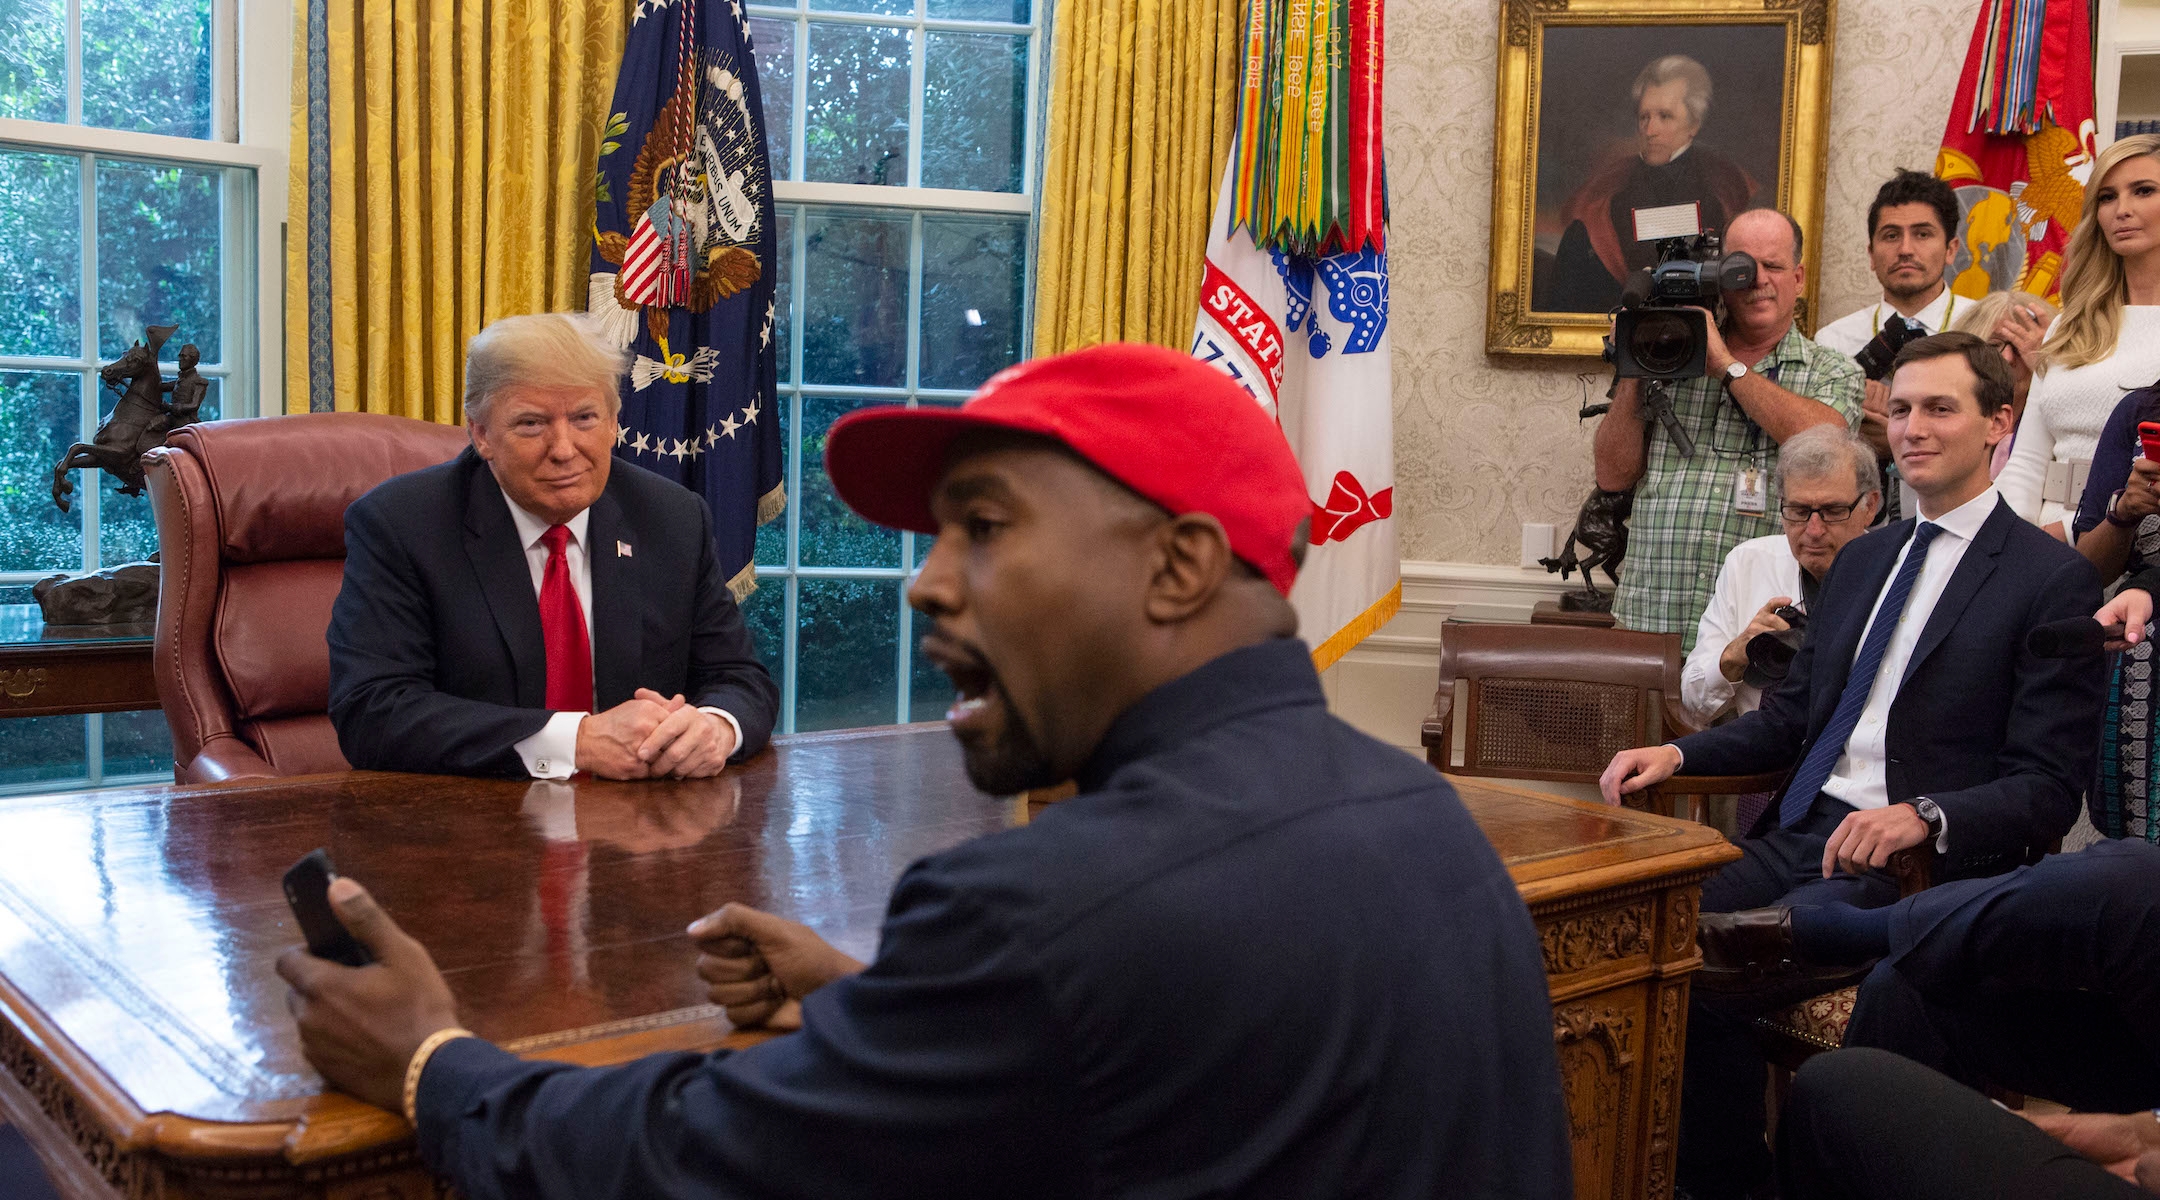 Trump with Kanye West in Oval Office